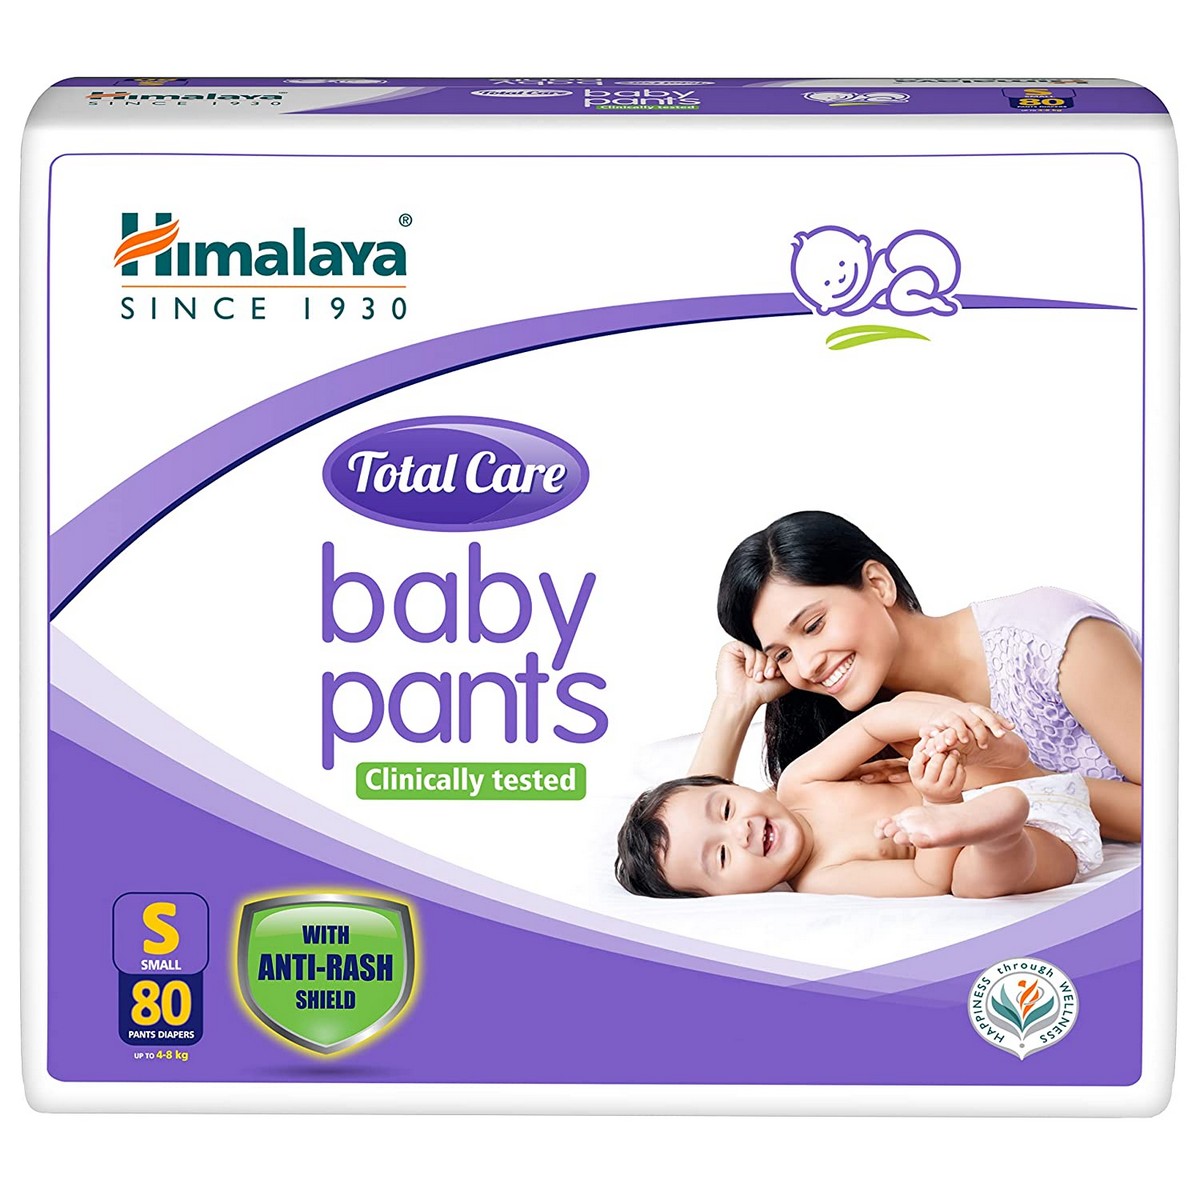 Himalaya Total Care baby pants Diaper (324 Pcs) - M Diaper (324 Pieces) in  Hyderabad at best price by G M Kirana & General Stores - Justdial